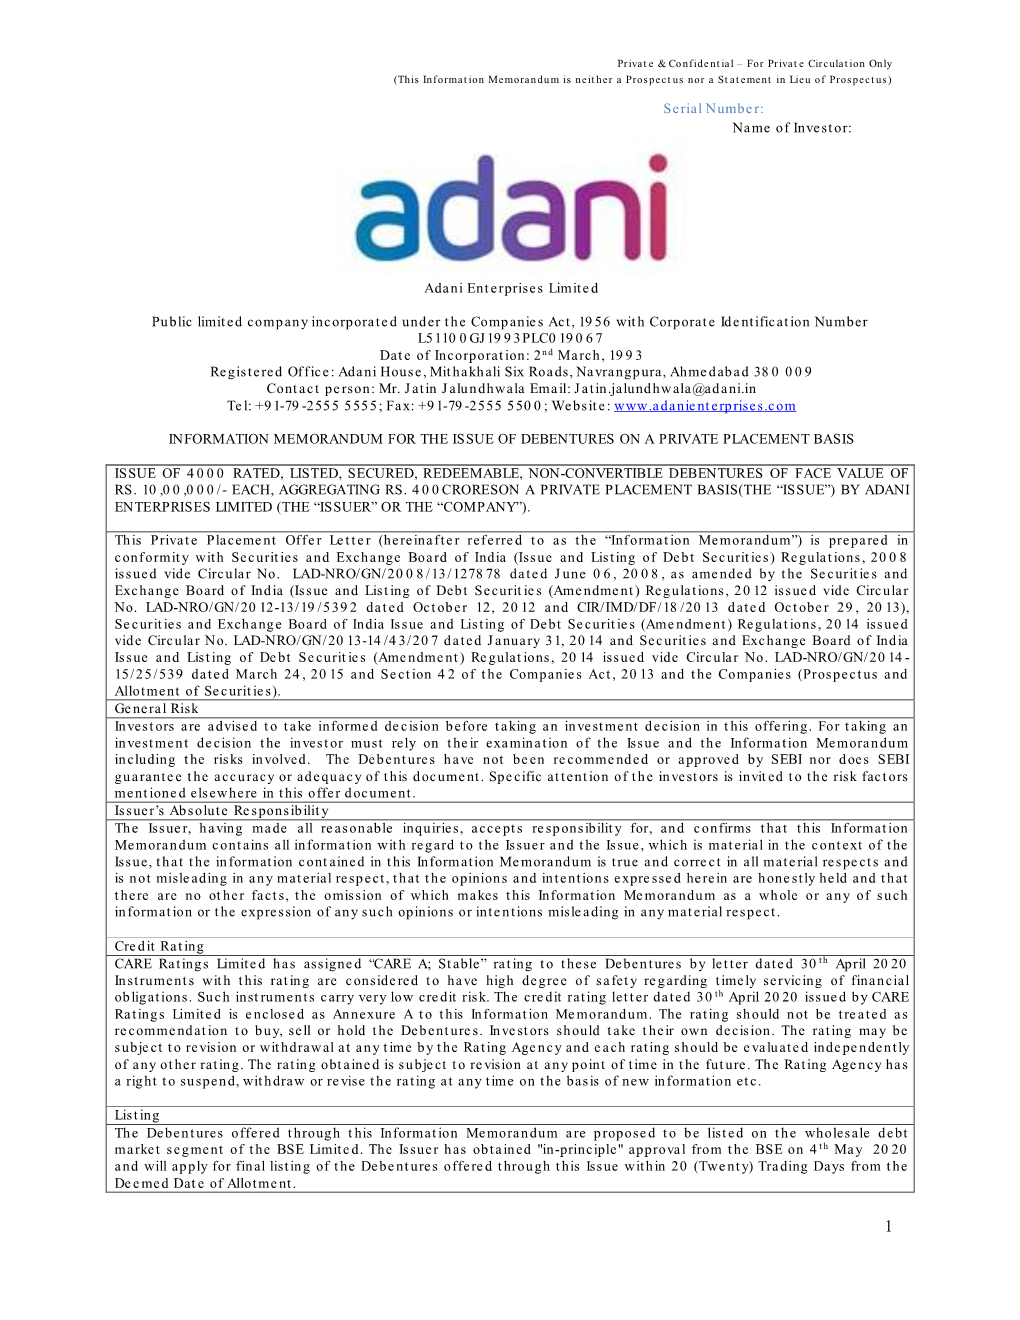 Adani Enterprises Limited Public Limited Company Incorporated Under the Companies Act, 1956